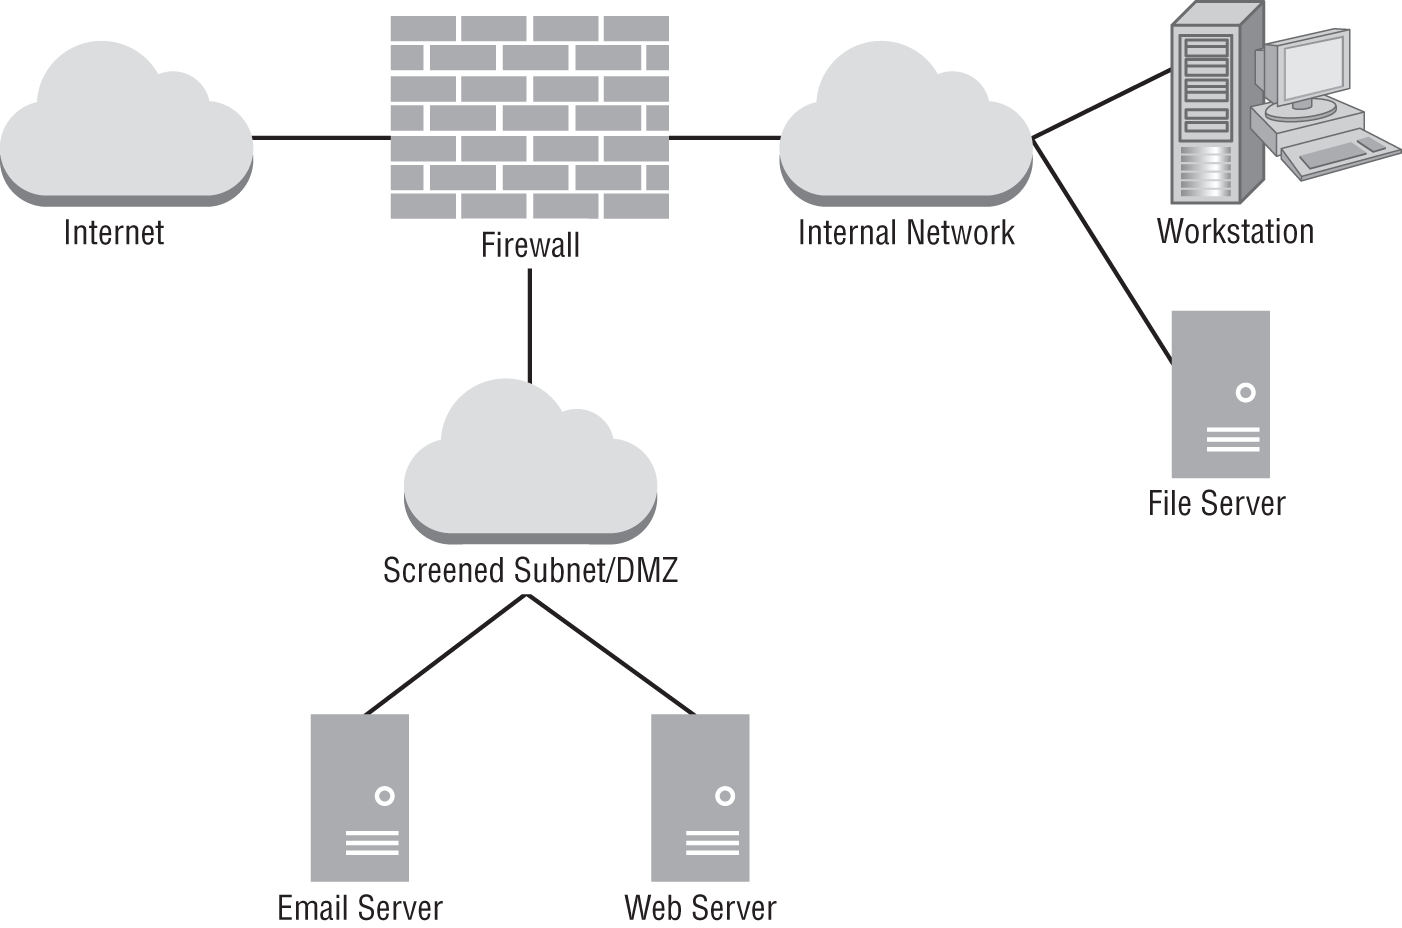 A system architecture. It involves internet, firewall, internal network, workstation, file server, web server, screened subnet, and email server.